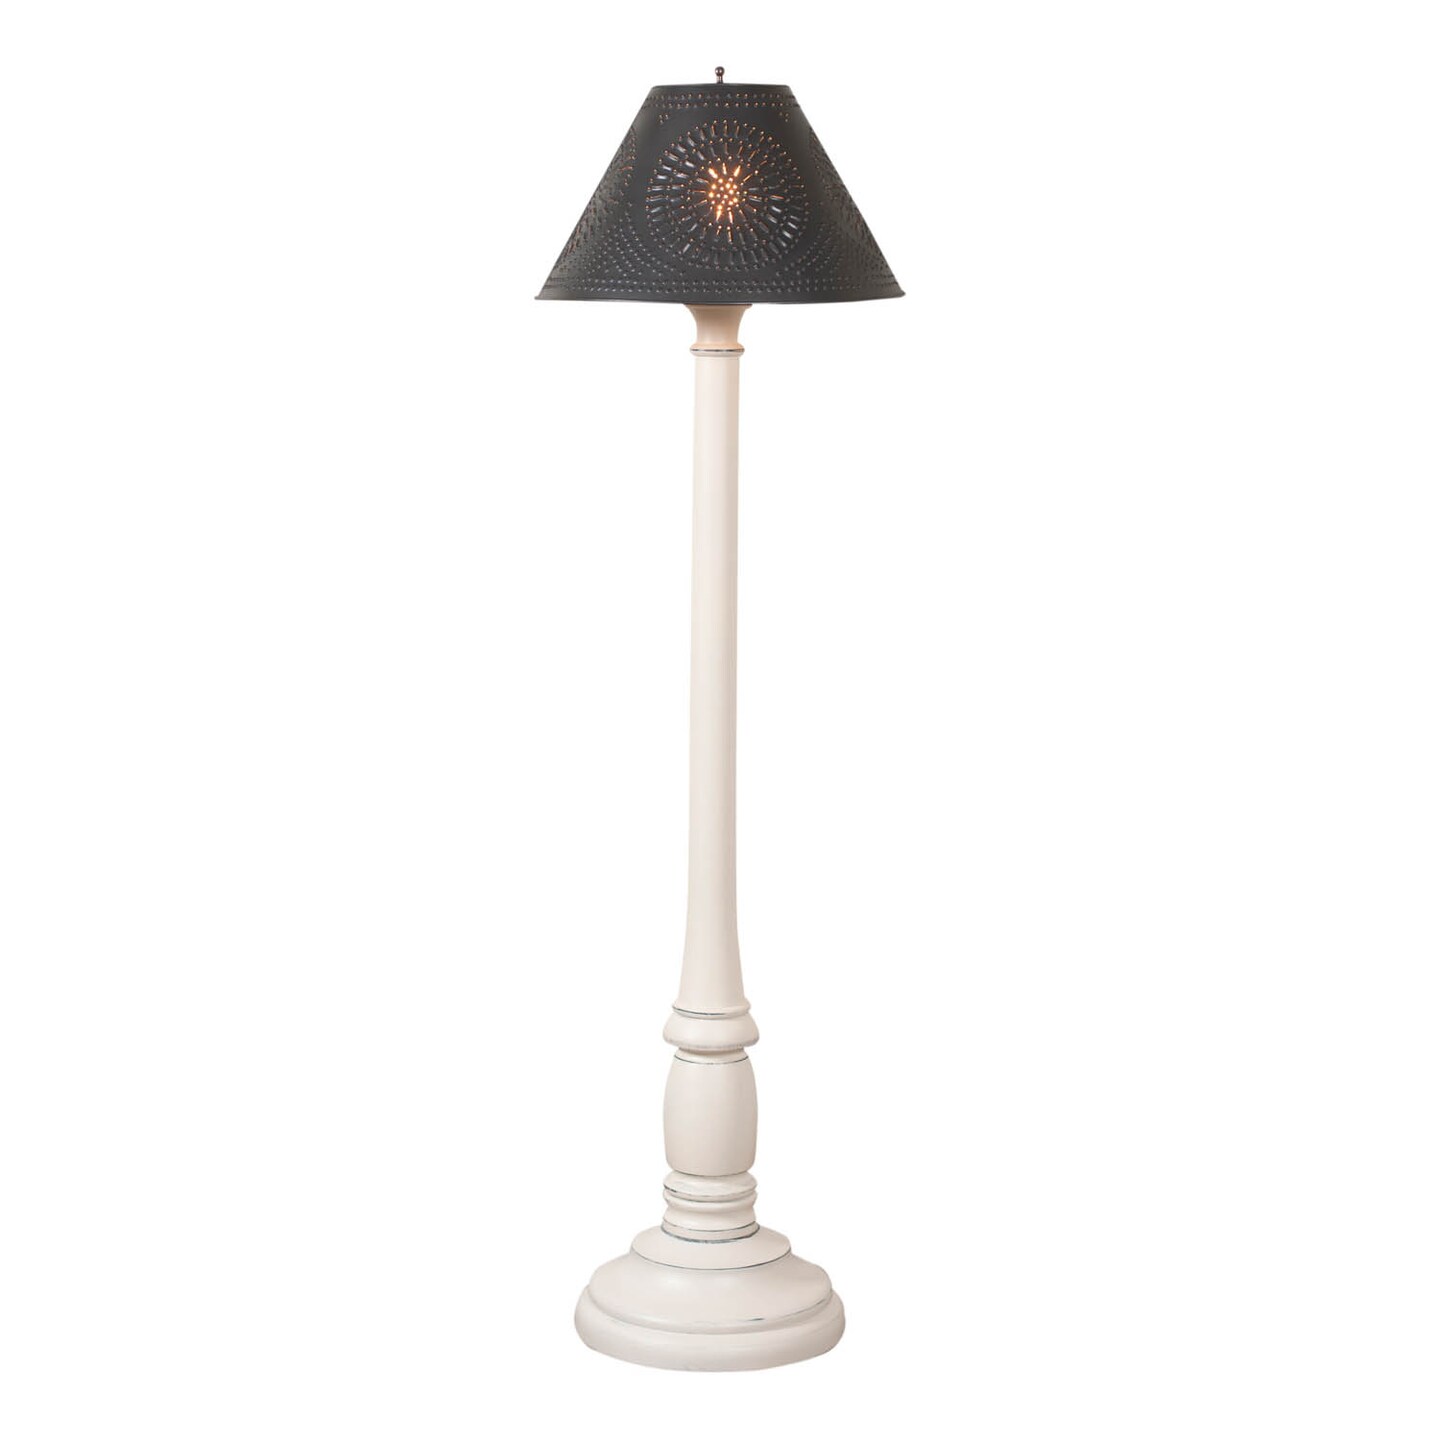 Irvins Country Tinware Brinton Floor Lamp in Rustic White with Smokey Black Metal Shade